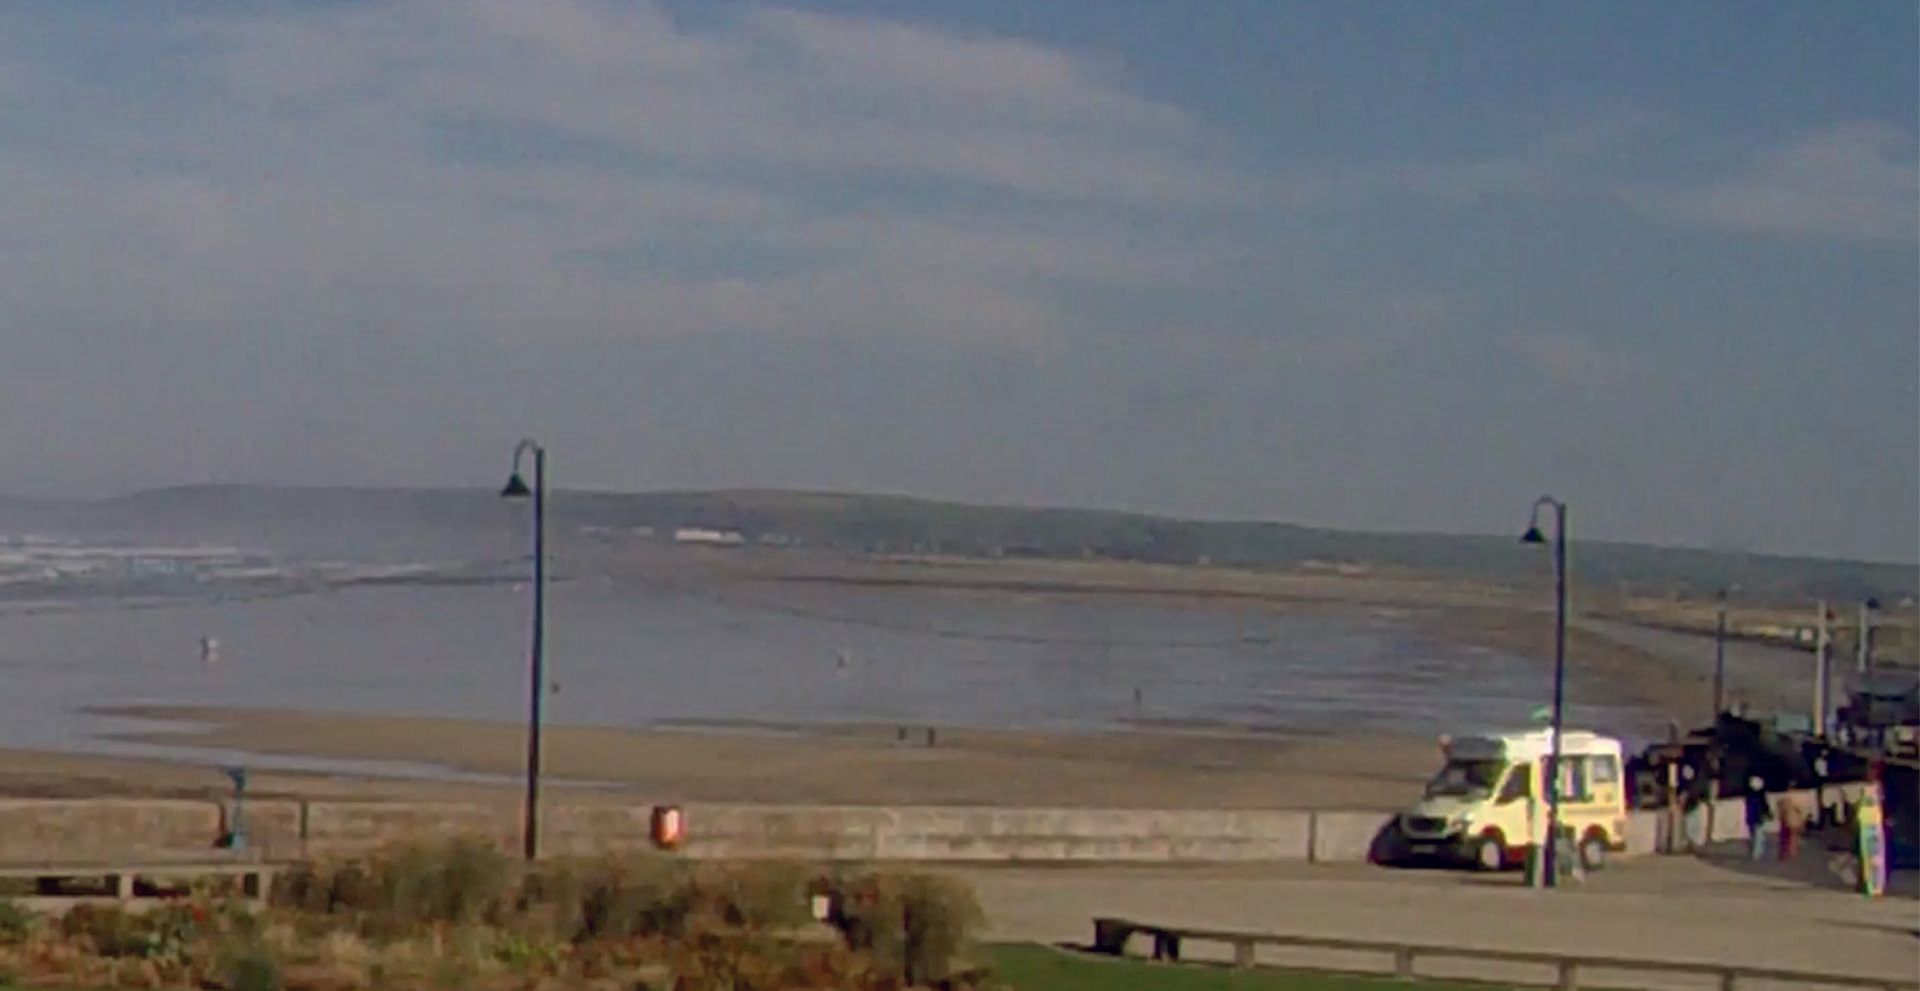 Image from the shop webcam of the beach